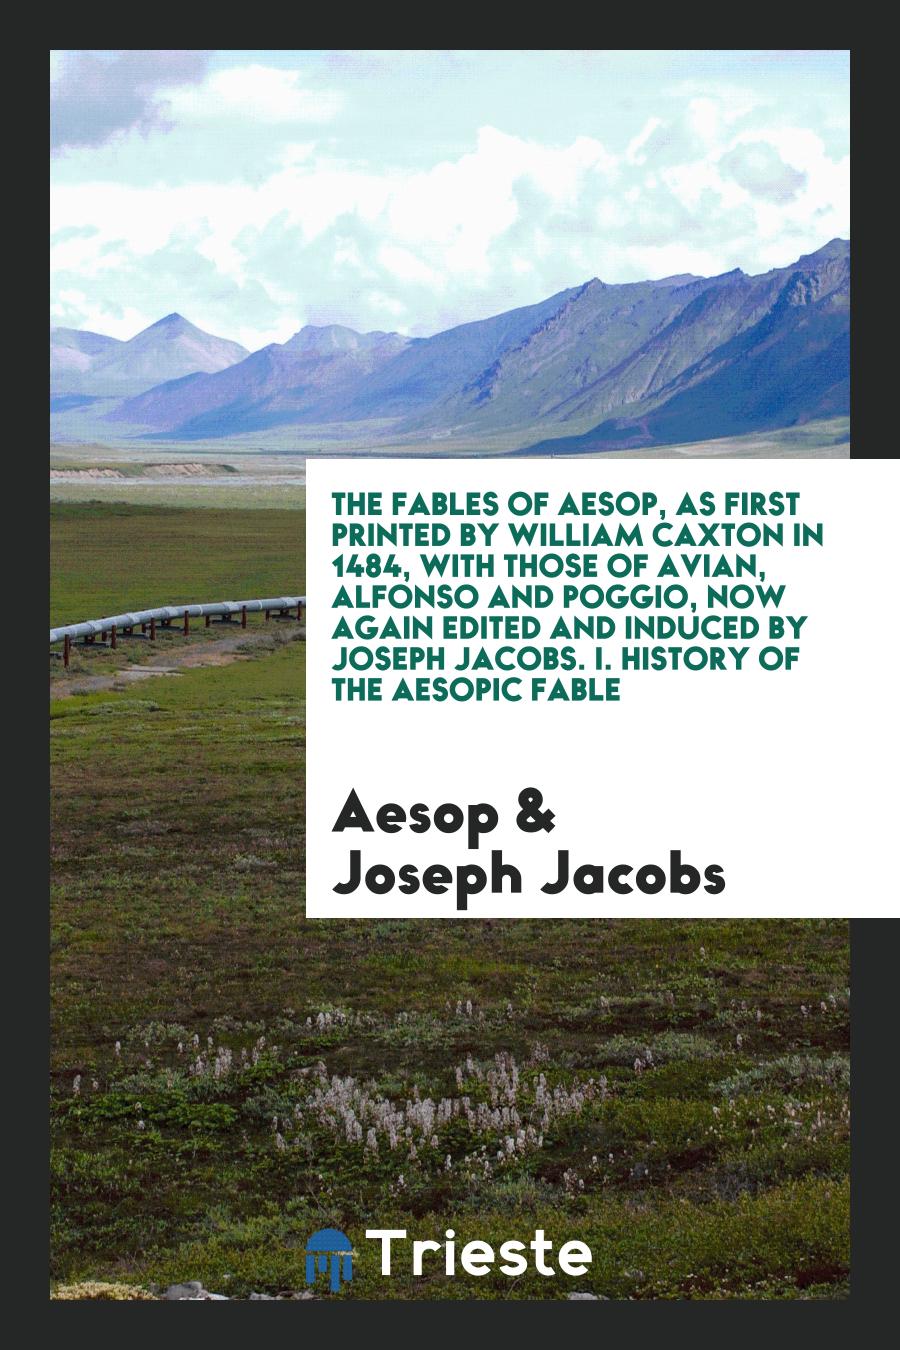 The Fables of Aesop, as First Printed by William Caxton in 1484, with Those of Avian, Alfonso and Poggio, Now Again Edited and Induced by Joseph Jacobs. I. History of the Aesopic Fable